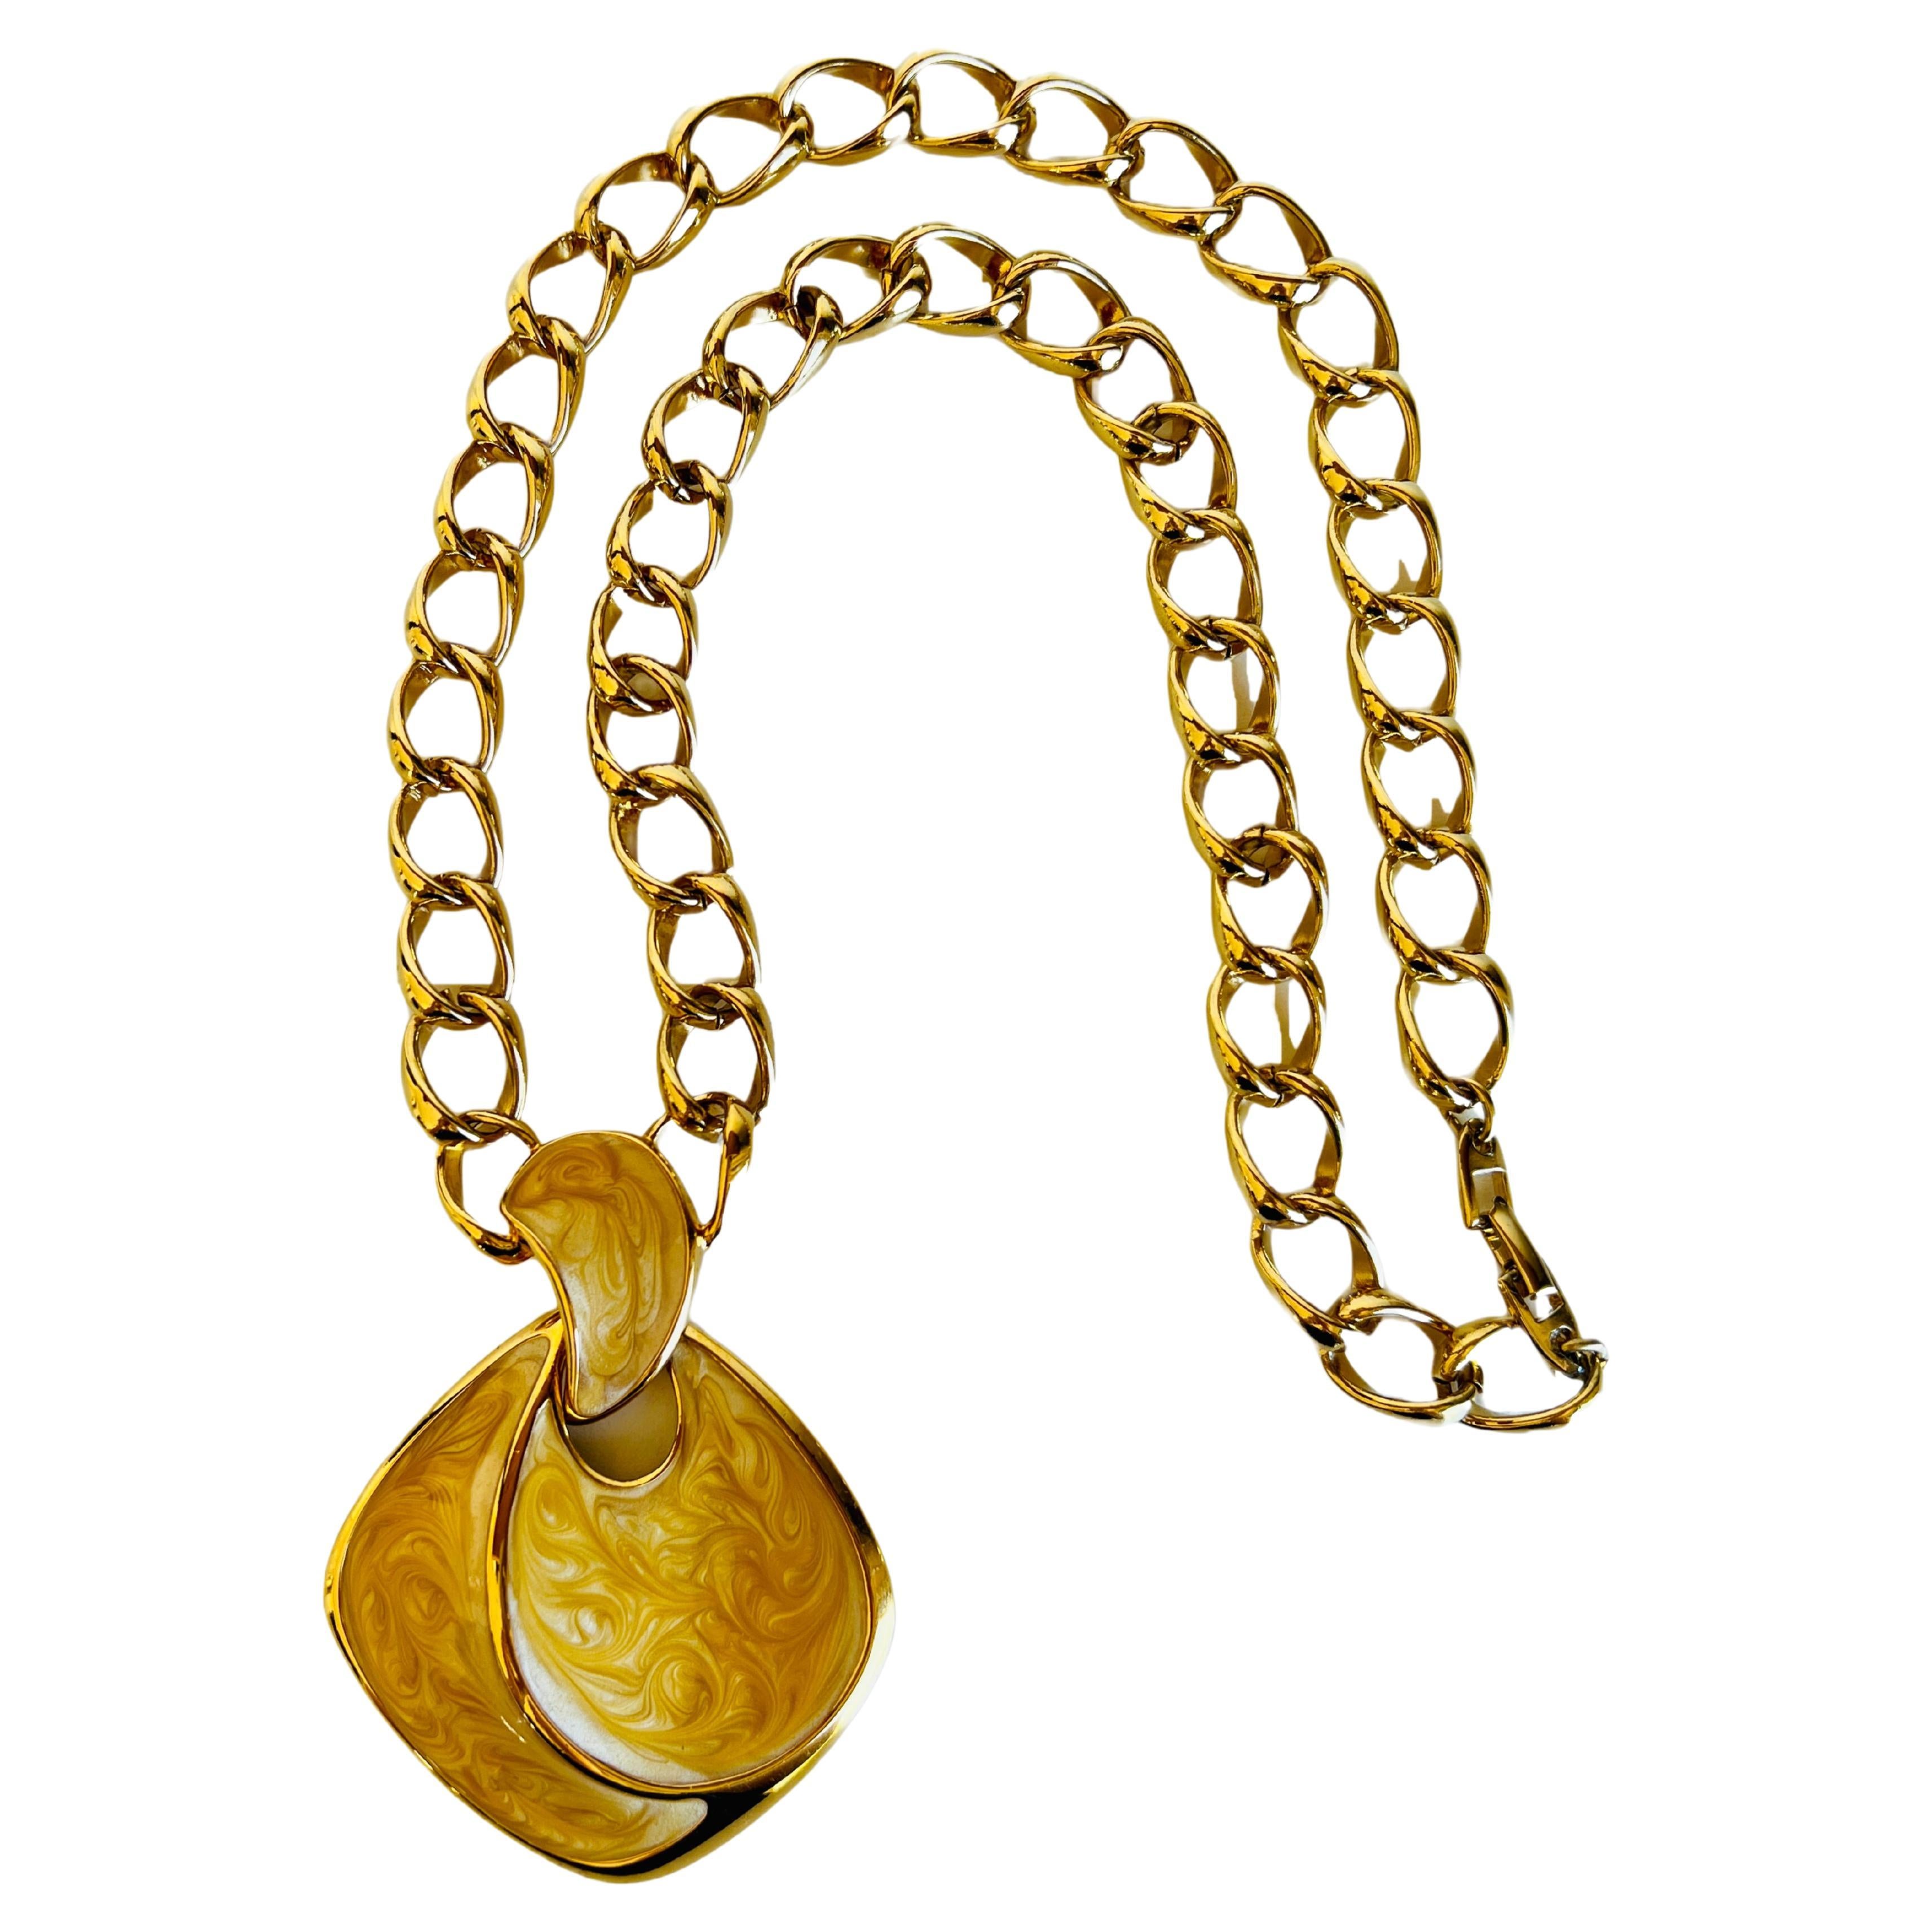 Napier Swirled Enamel Chunky Gold Chain Link Statement Necklace (Collier à maillons en or) en vente